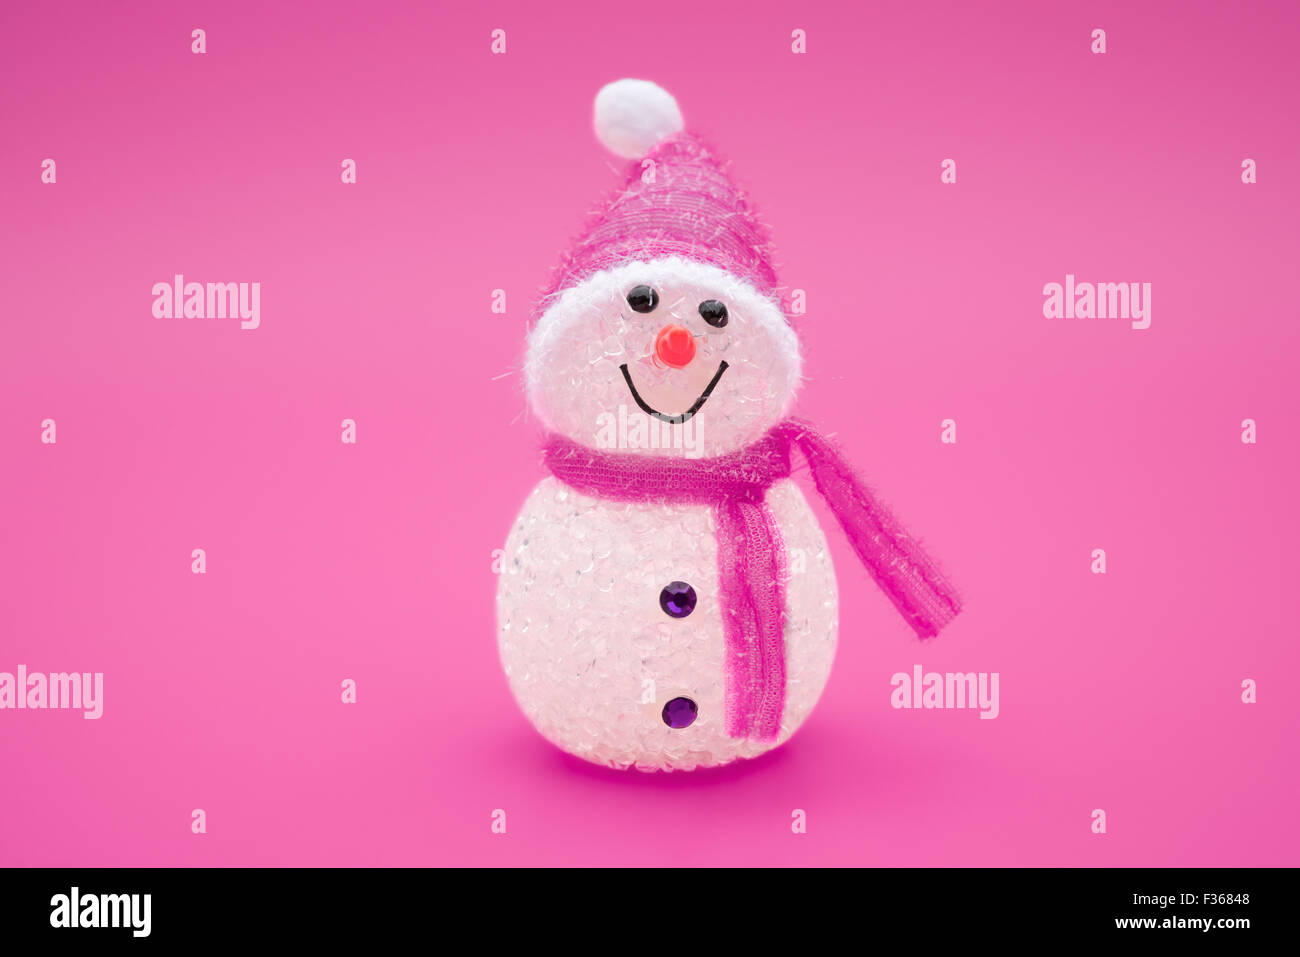 smiling toy christmas snowman on a red background Stock Photo